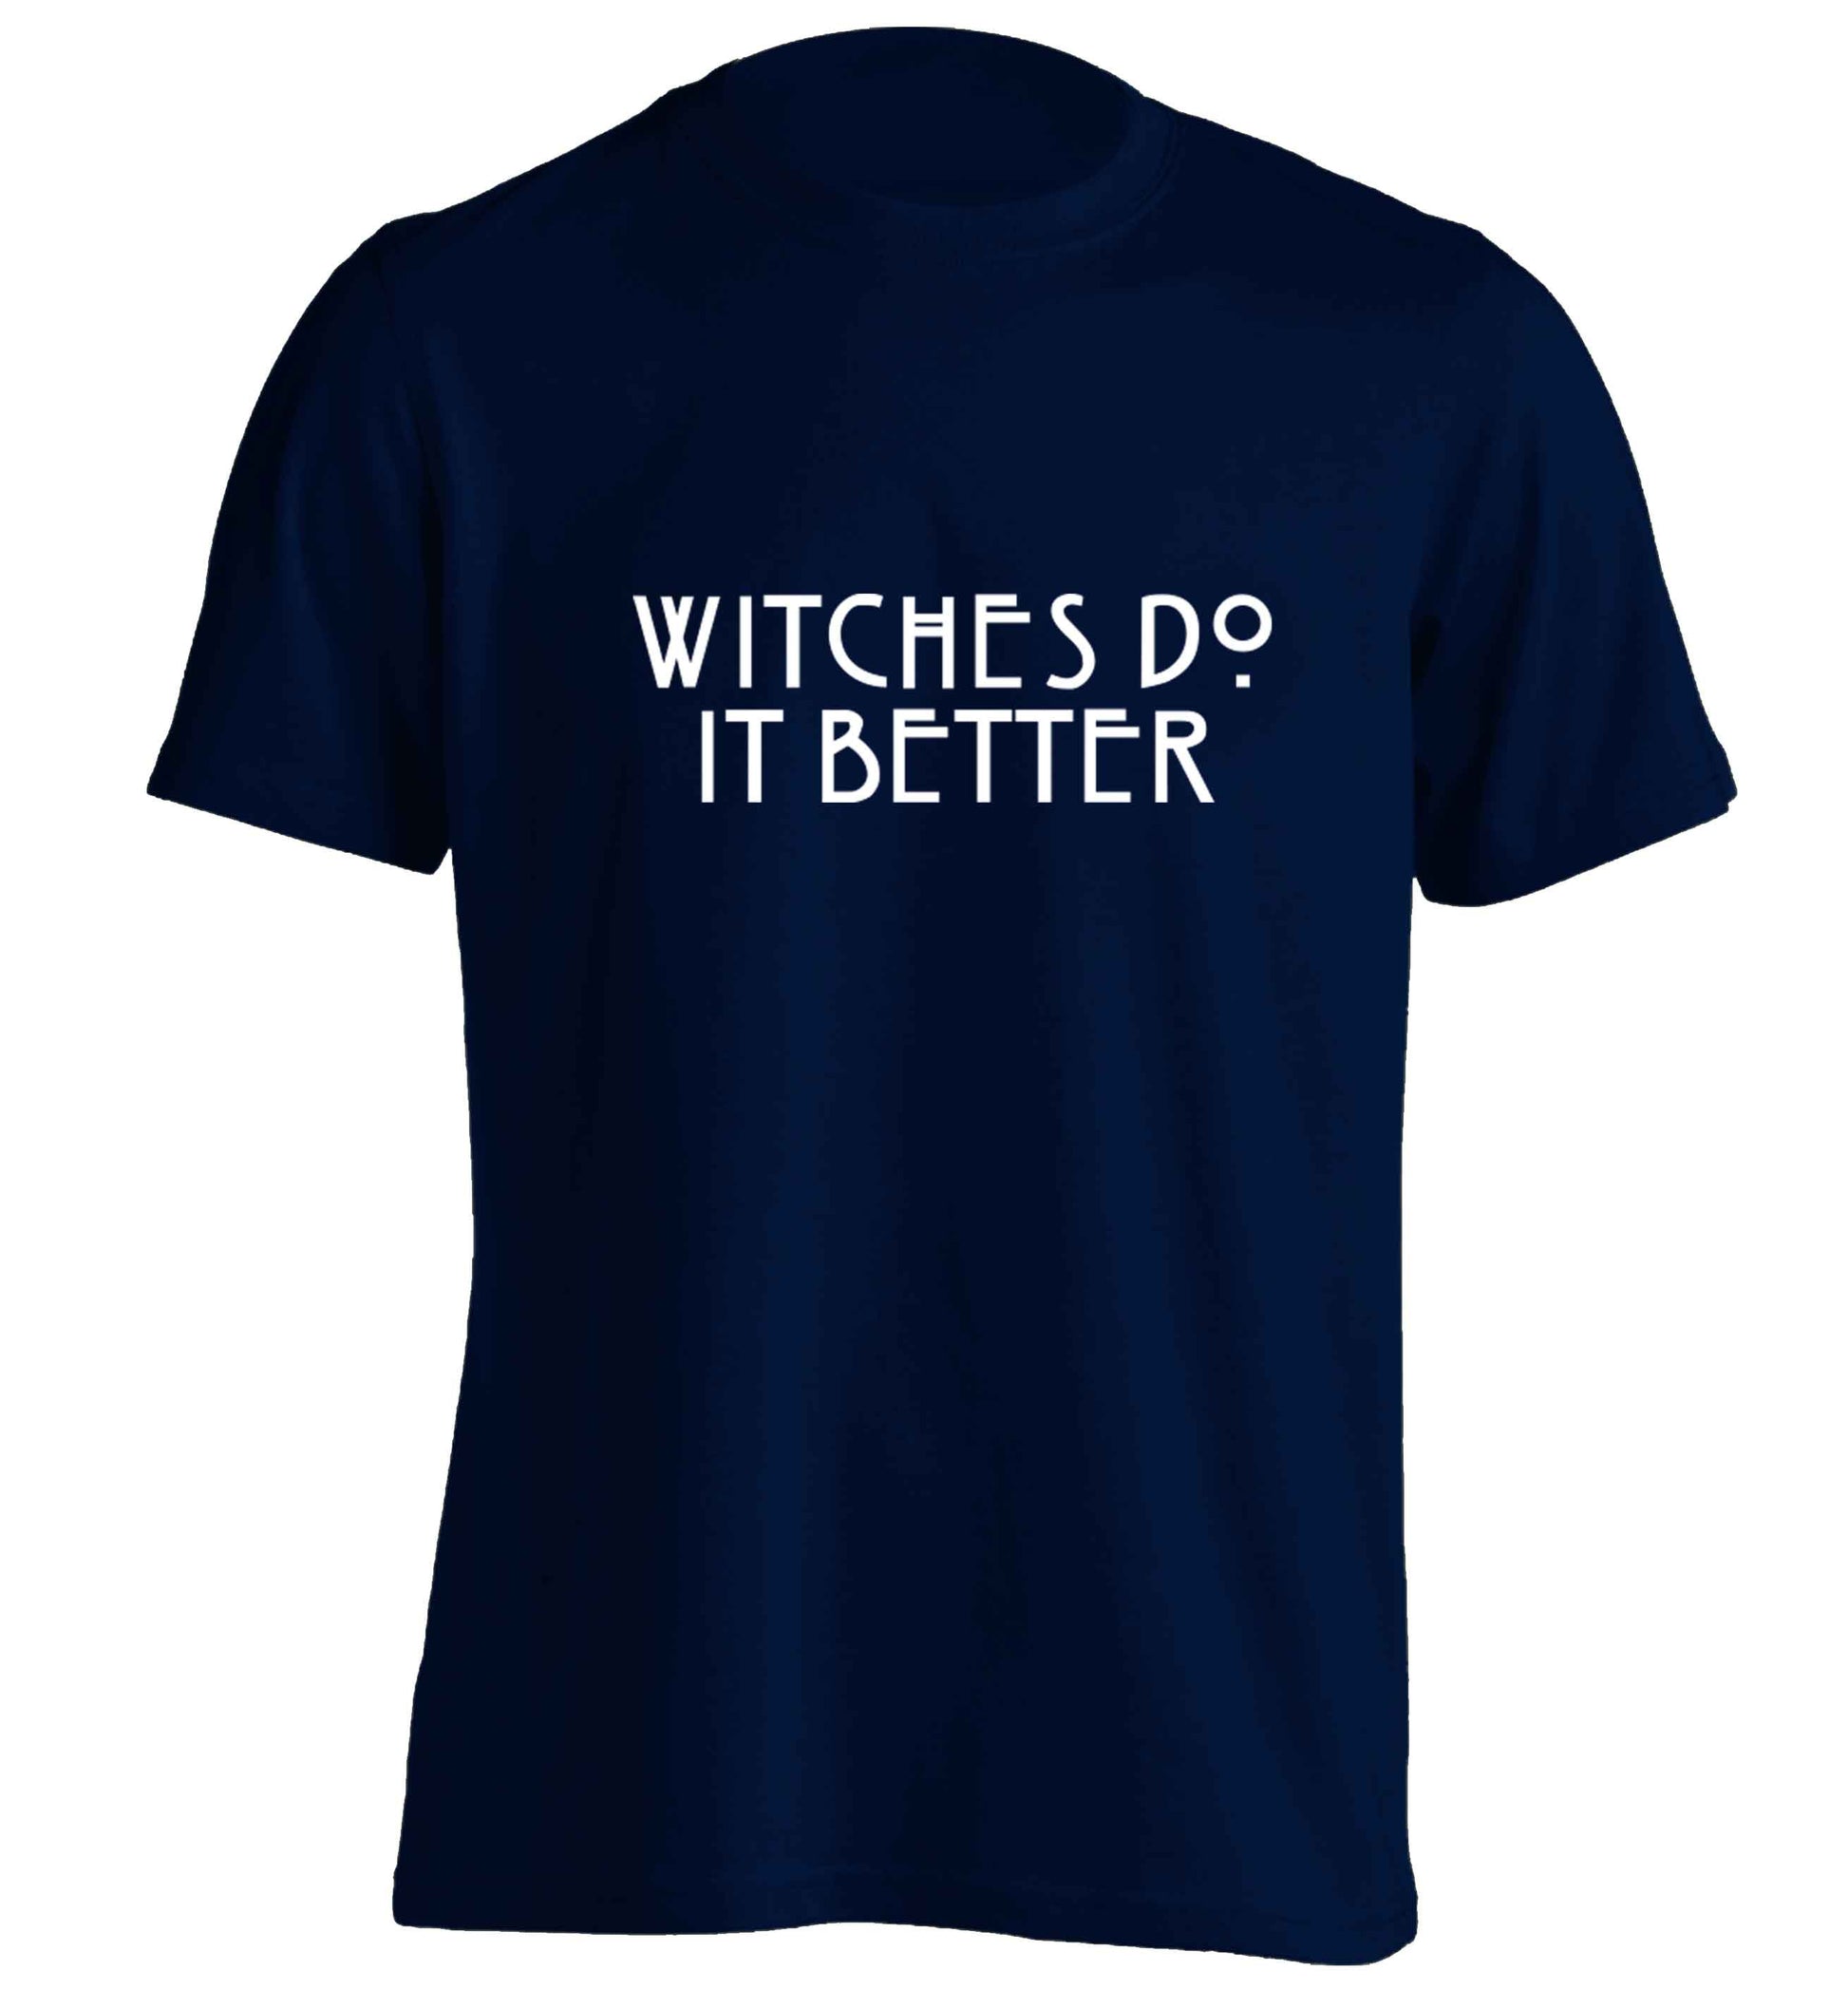 Witches do it better adults unisex navy Tshirt 2XL